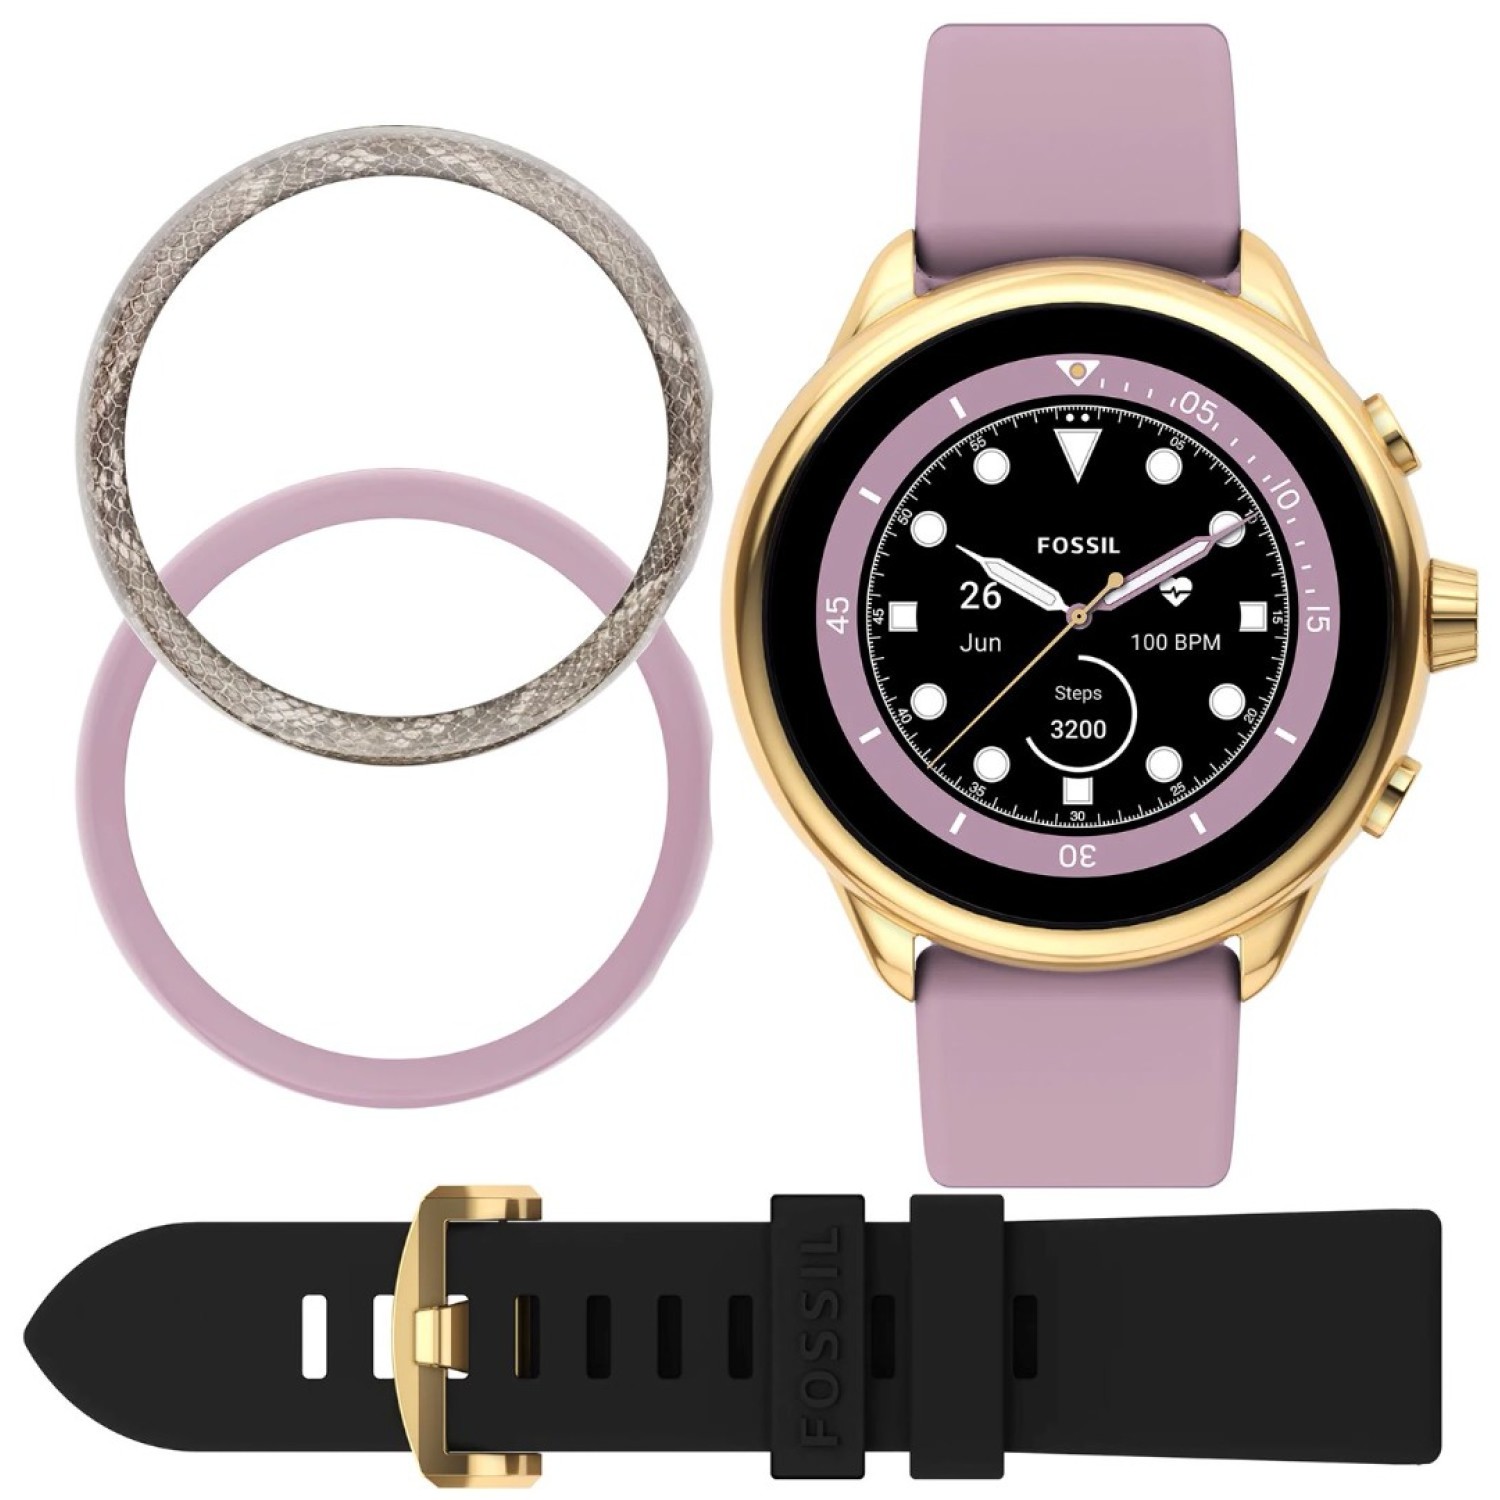 FTW4075SETR Fossil Gen 6 Wellness Edition Smartwatch Lilac Silicone and Interchangeable Strap and Bumper Set -fossil watches auckland nz